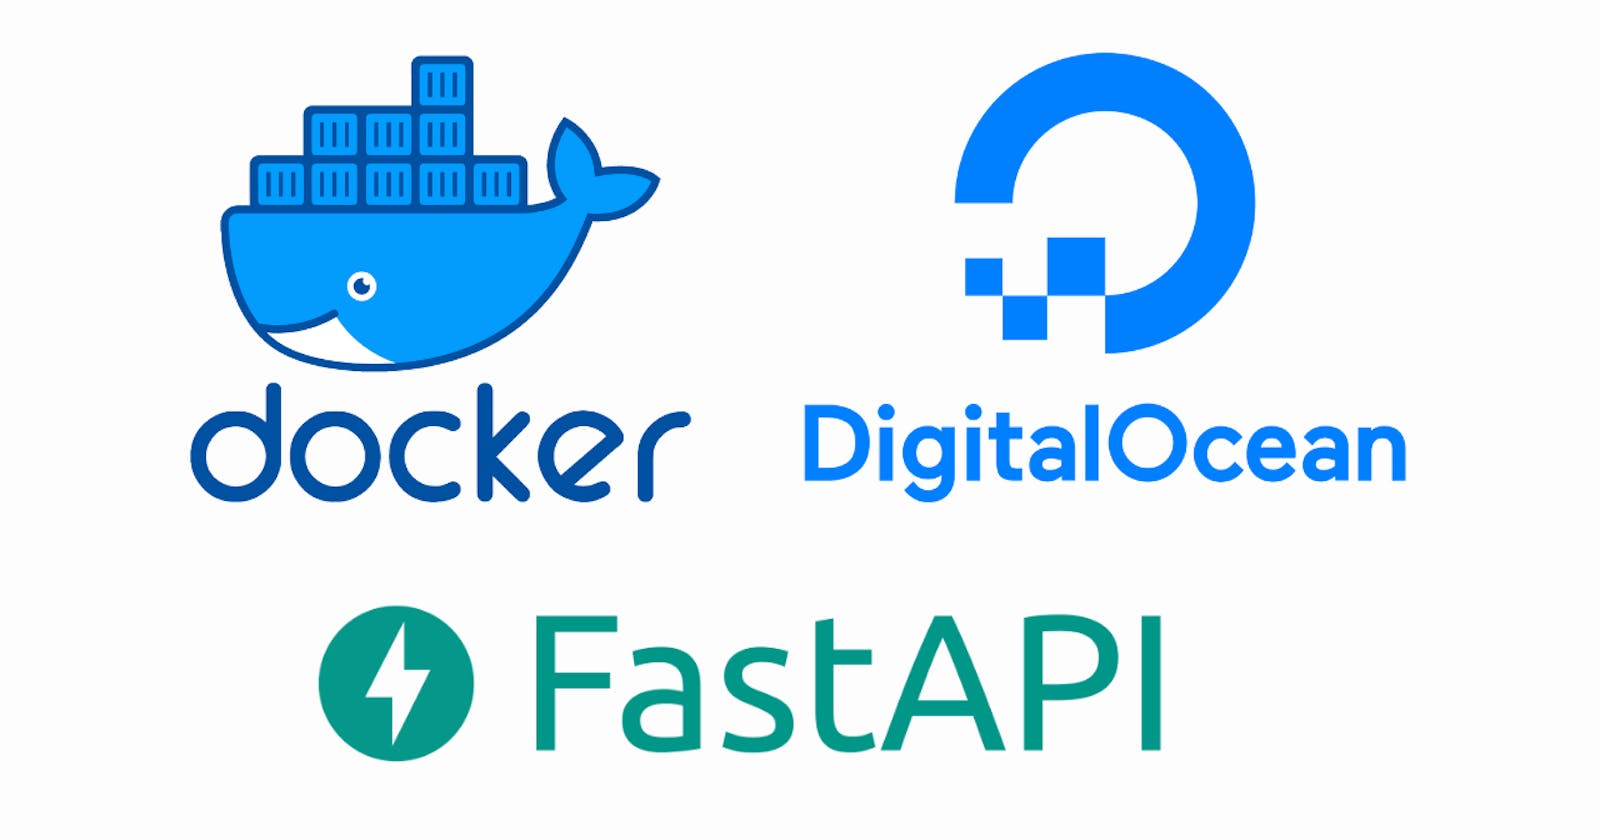 Deploy a  containerised Fast API application in Digital Ocean